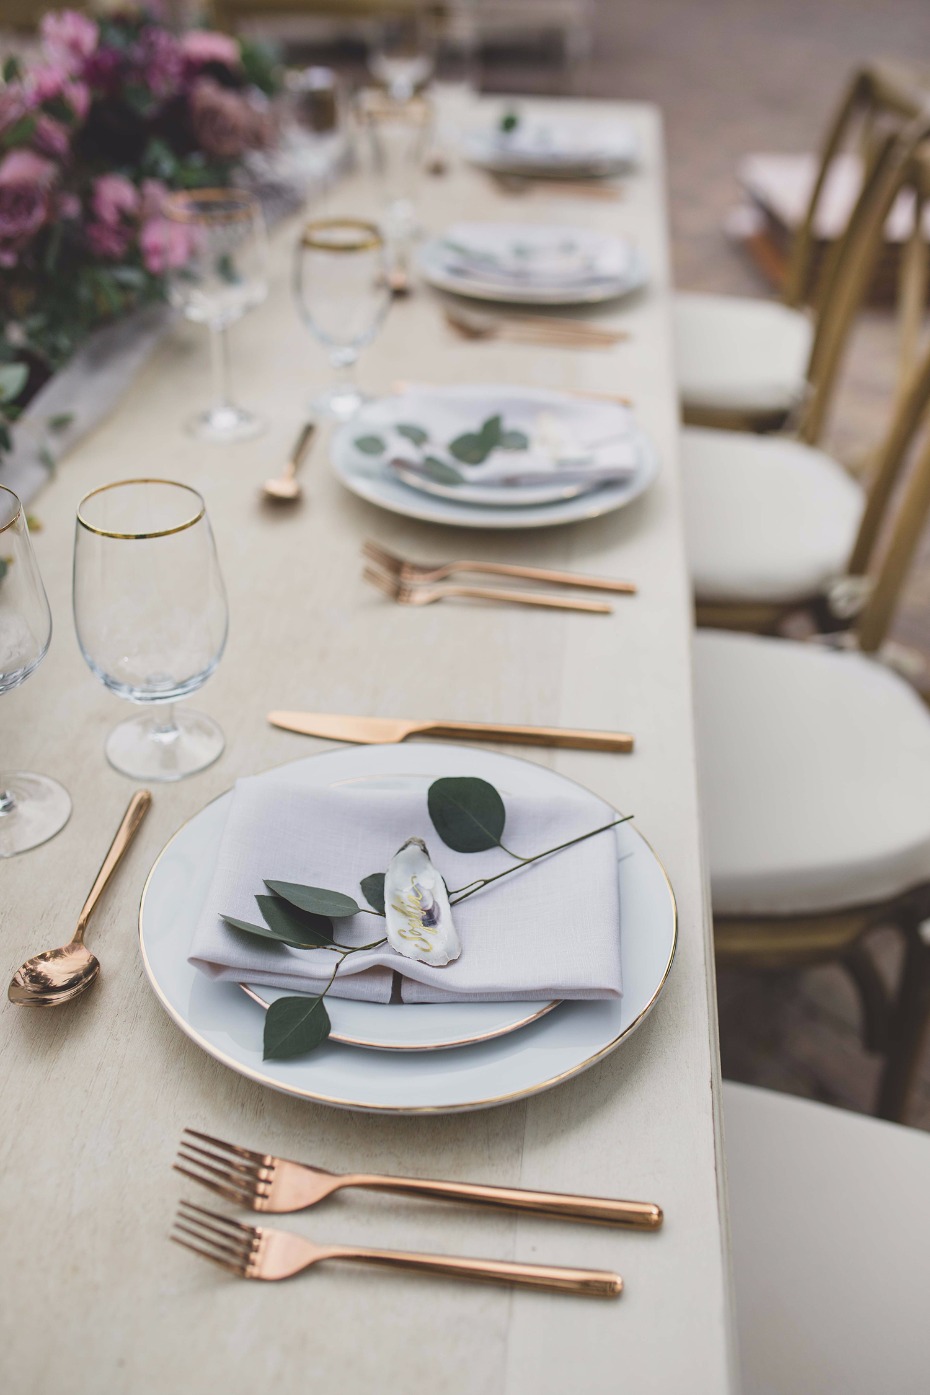 Simple and elegant table setting with copper flatware